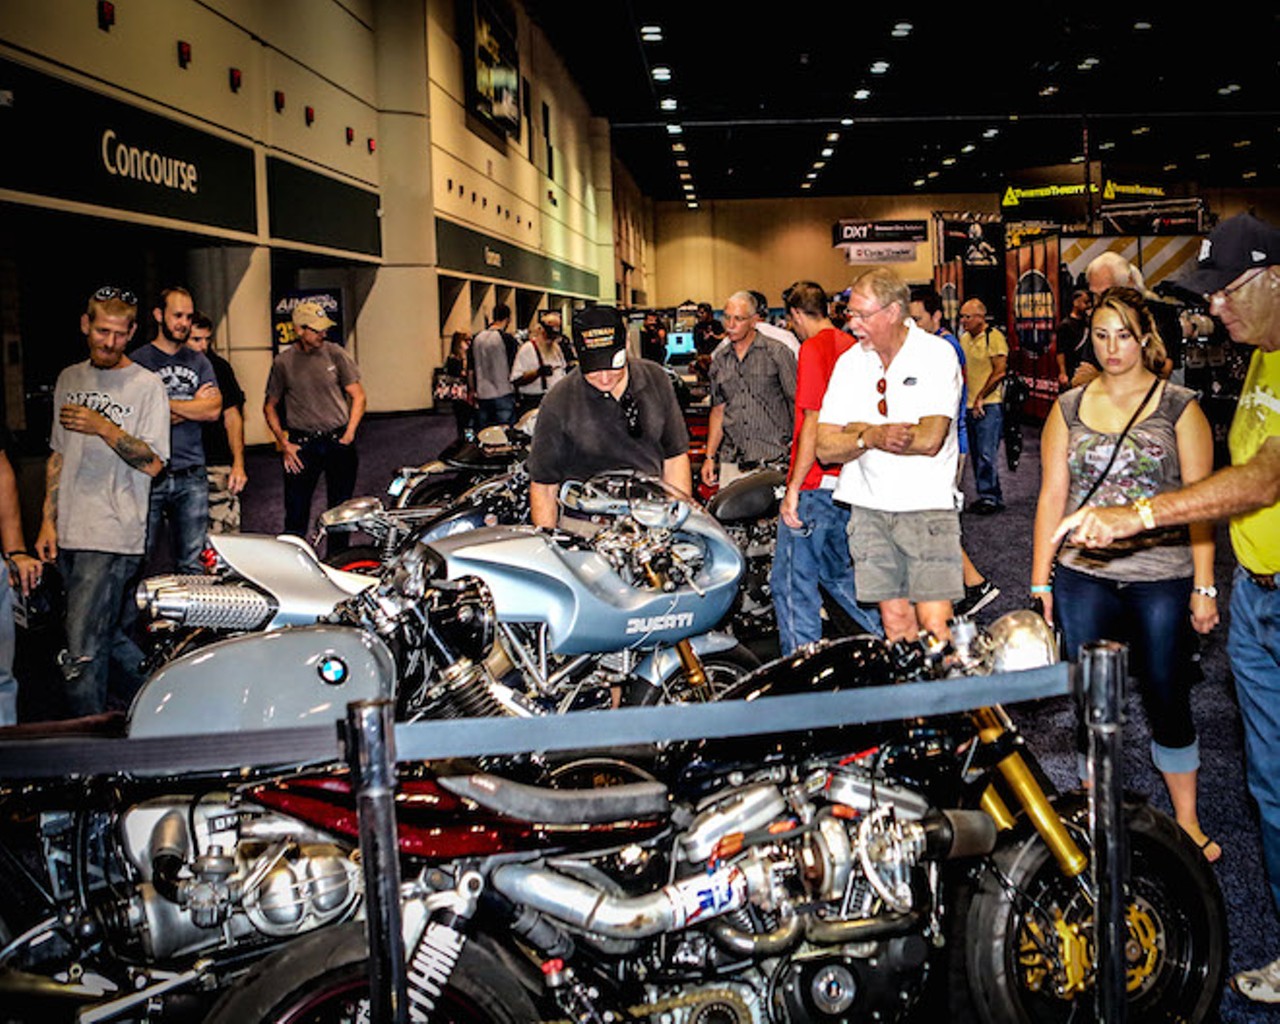 18 shots of what you can expect at this weekend's AIMExpo